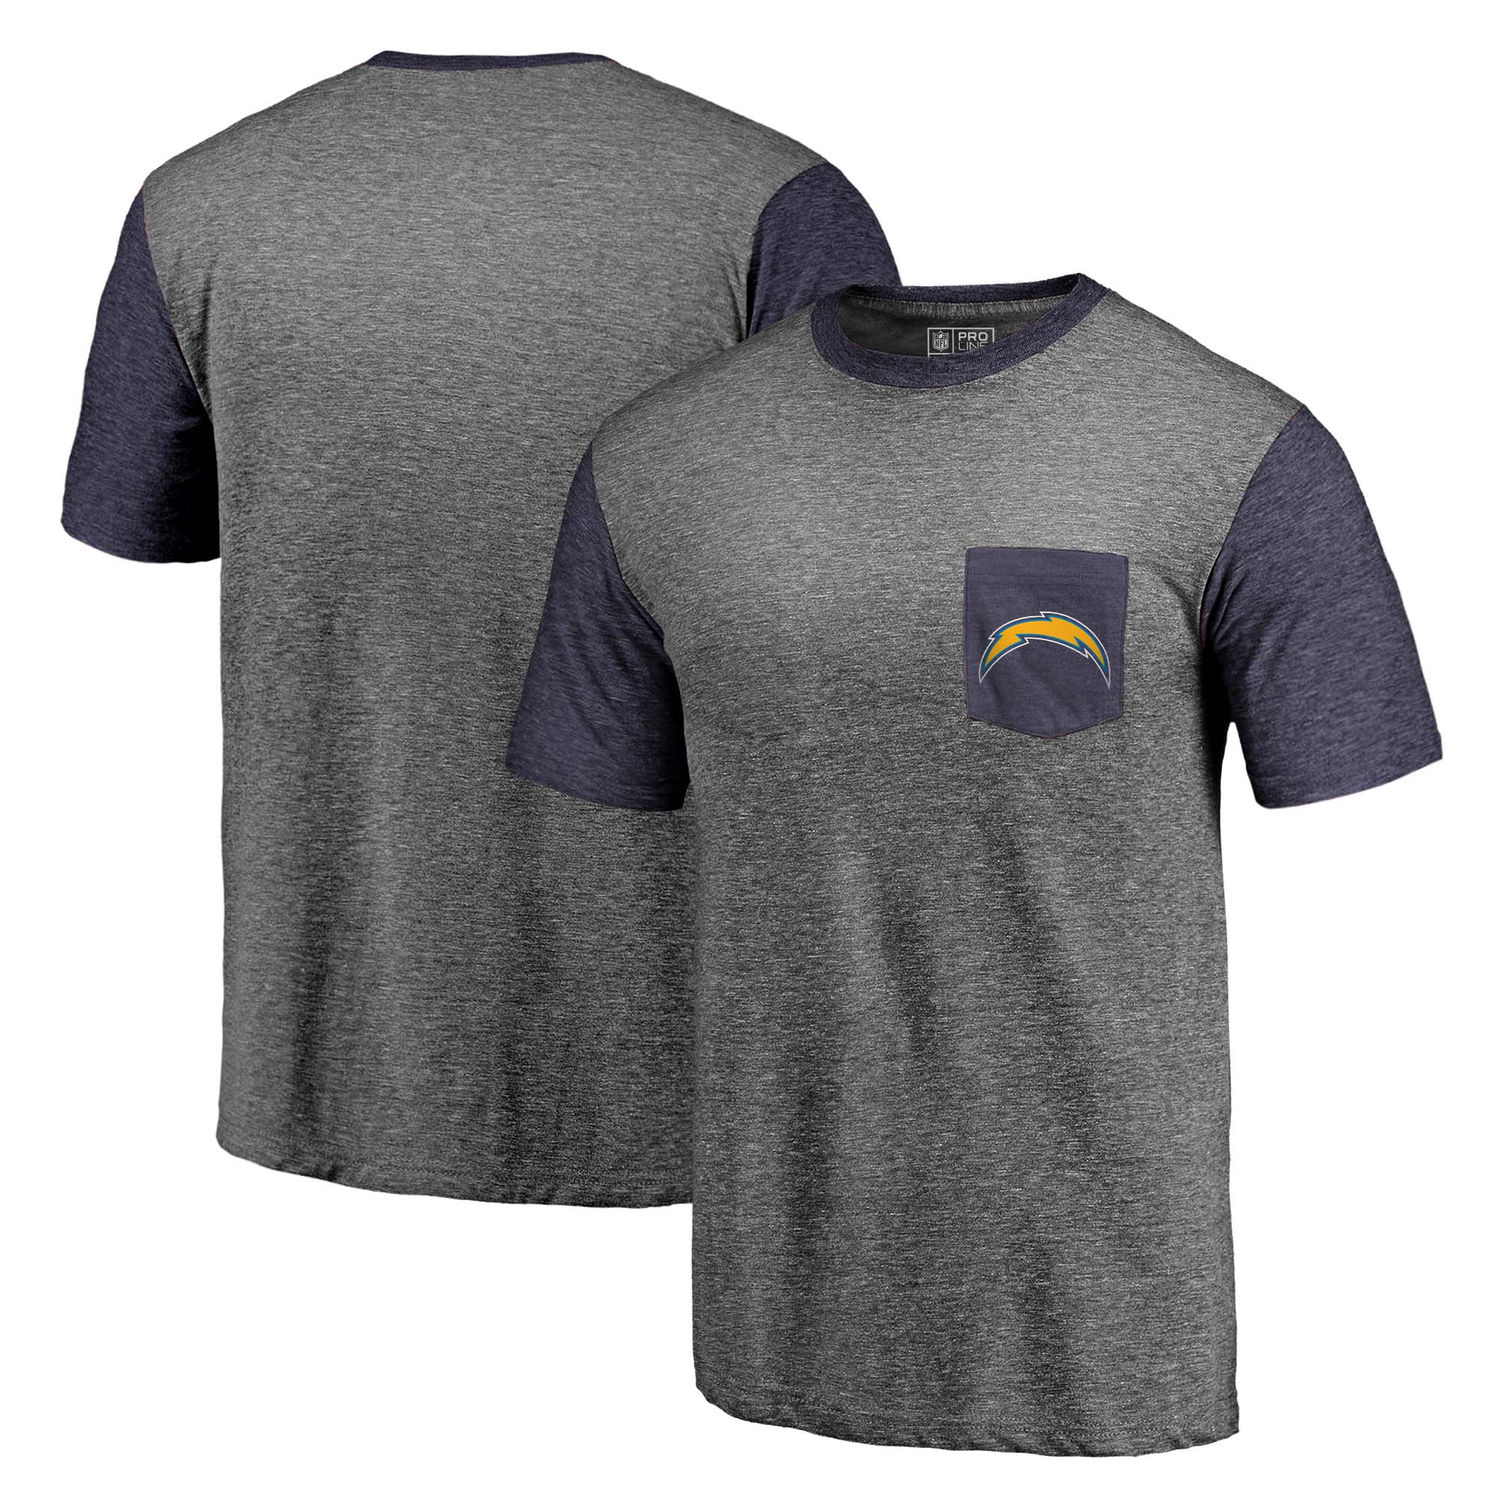 Men's Los Angeles Chargers NFL Pro Line by Fanatics Branded Heathered Gray-Navy Refresh Pocket T-Shirt